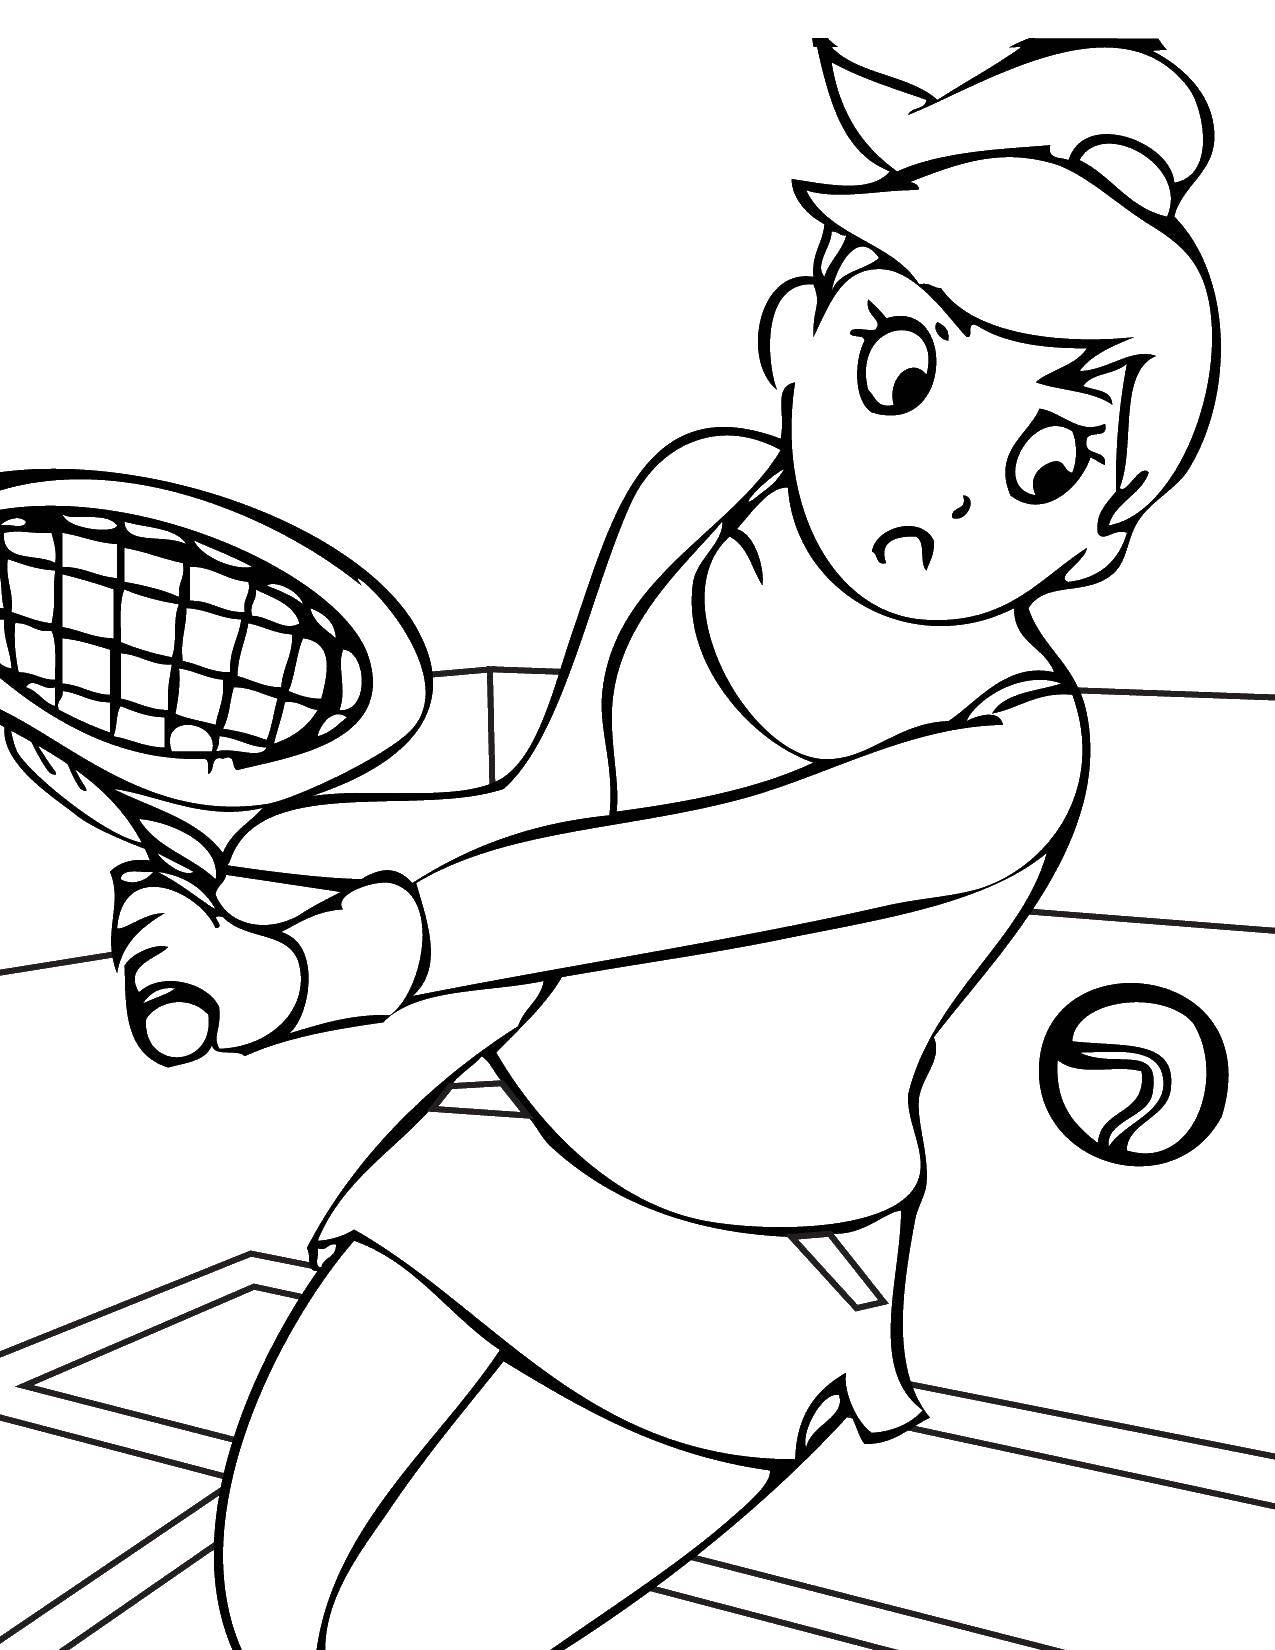 Coloring Girl playing tennis. Category Sports. Tags:  mya.